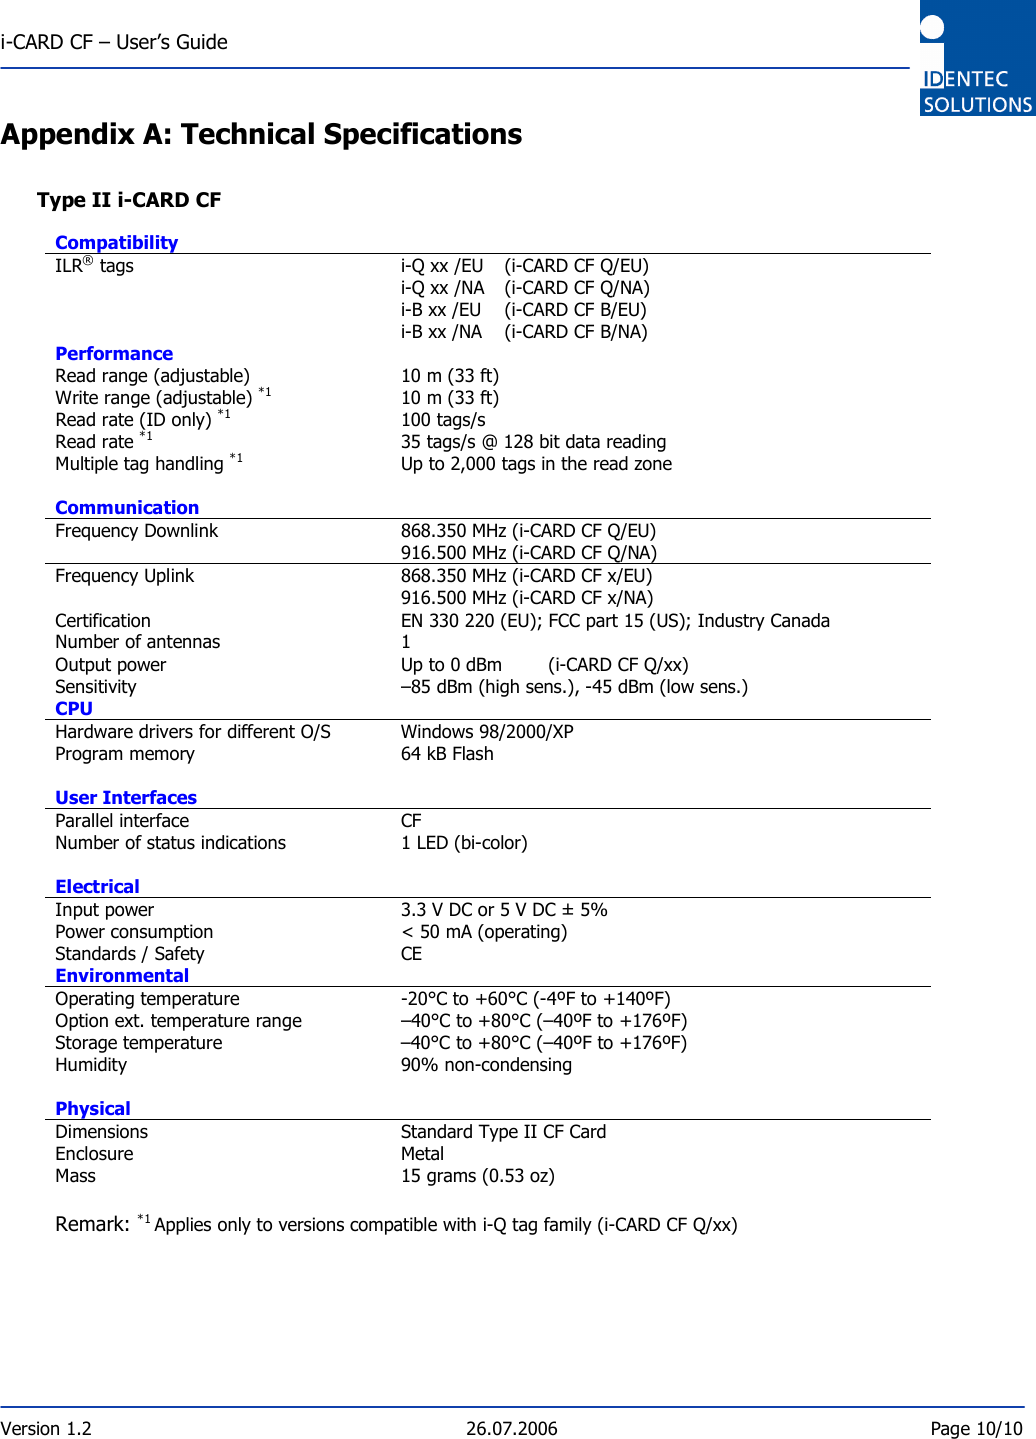  i-CARD CF – User’s Guide  Version 1.2  26.07.2006  Page 10/10    Appendix A: Technical Specifications  Type II i-CARD CF  Compatibility   ILR® tags   i-Q xx /EU   (i-CARD CF Q/EU)  i-Q xx /NA   (i-CARD CF Q/NA)  i-B xx /EU  (i-CARD CF B/EU)  i-B xx /NA  (i-CARD CF B/NA) Performance   Read range (adjustable)   10 m (33 ft) Write range (adjustable) *1   10 m (33 ft) Read rate (ID only) *1   100 tags/s  Read rate *1   35 tags/s @ 128 bit data reading Multiple tag handling *1   Up to 2,000 tags in the read zone Communication   Frequency Downlink   868.350 MHz (i-CARD CF Q/EU)   916.500 MHz (i-CARD CF Q/NA) Frequency Uplink   868.350 MHz (i-CARD CF x/EU)   916.500 MHz (i-CARD CF x/NA) Certification   EN 330 220 (EU); FCC part 15 (US); Industry Canada Number of antennas   1 Output power   Up to 0 dBm   (i-CARD CF Q/xx) Sensitivity   –85 dBm (high sens.), -45 dBm (low sens.) CPU   Hardware drivers for different O/S   Windows 98/2000/XP Program memory   64 kB Flash User Interfaces   Parallel interface   CF Number of status indications   1 LED (bi-color) Electrical   Input power   3.3 V DC or 5 V DC ± 5% Power consumption   &lt; 50 mA (operating)  Standards / Safety   CE Environmental   Operating temperature   -20°C to +60°C (-4ºF to +140ºF) Option ext. temperature range   –40°C to +80°C (–40ºF to +176ºF) Storage temperature   –40°C to +80°C (–40ºF to +176ºF) Humidity   90% non-condensing Physical   Dimensions   Standard Type II CF Card Enclosure   Metal Mass   15 grams (0.53 oz)  Remark: *1 Applies only to versions compatible with i-Q tag family (i-CARD CF Q/xx) 